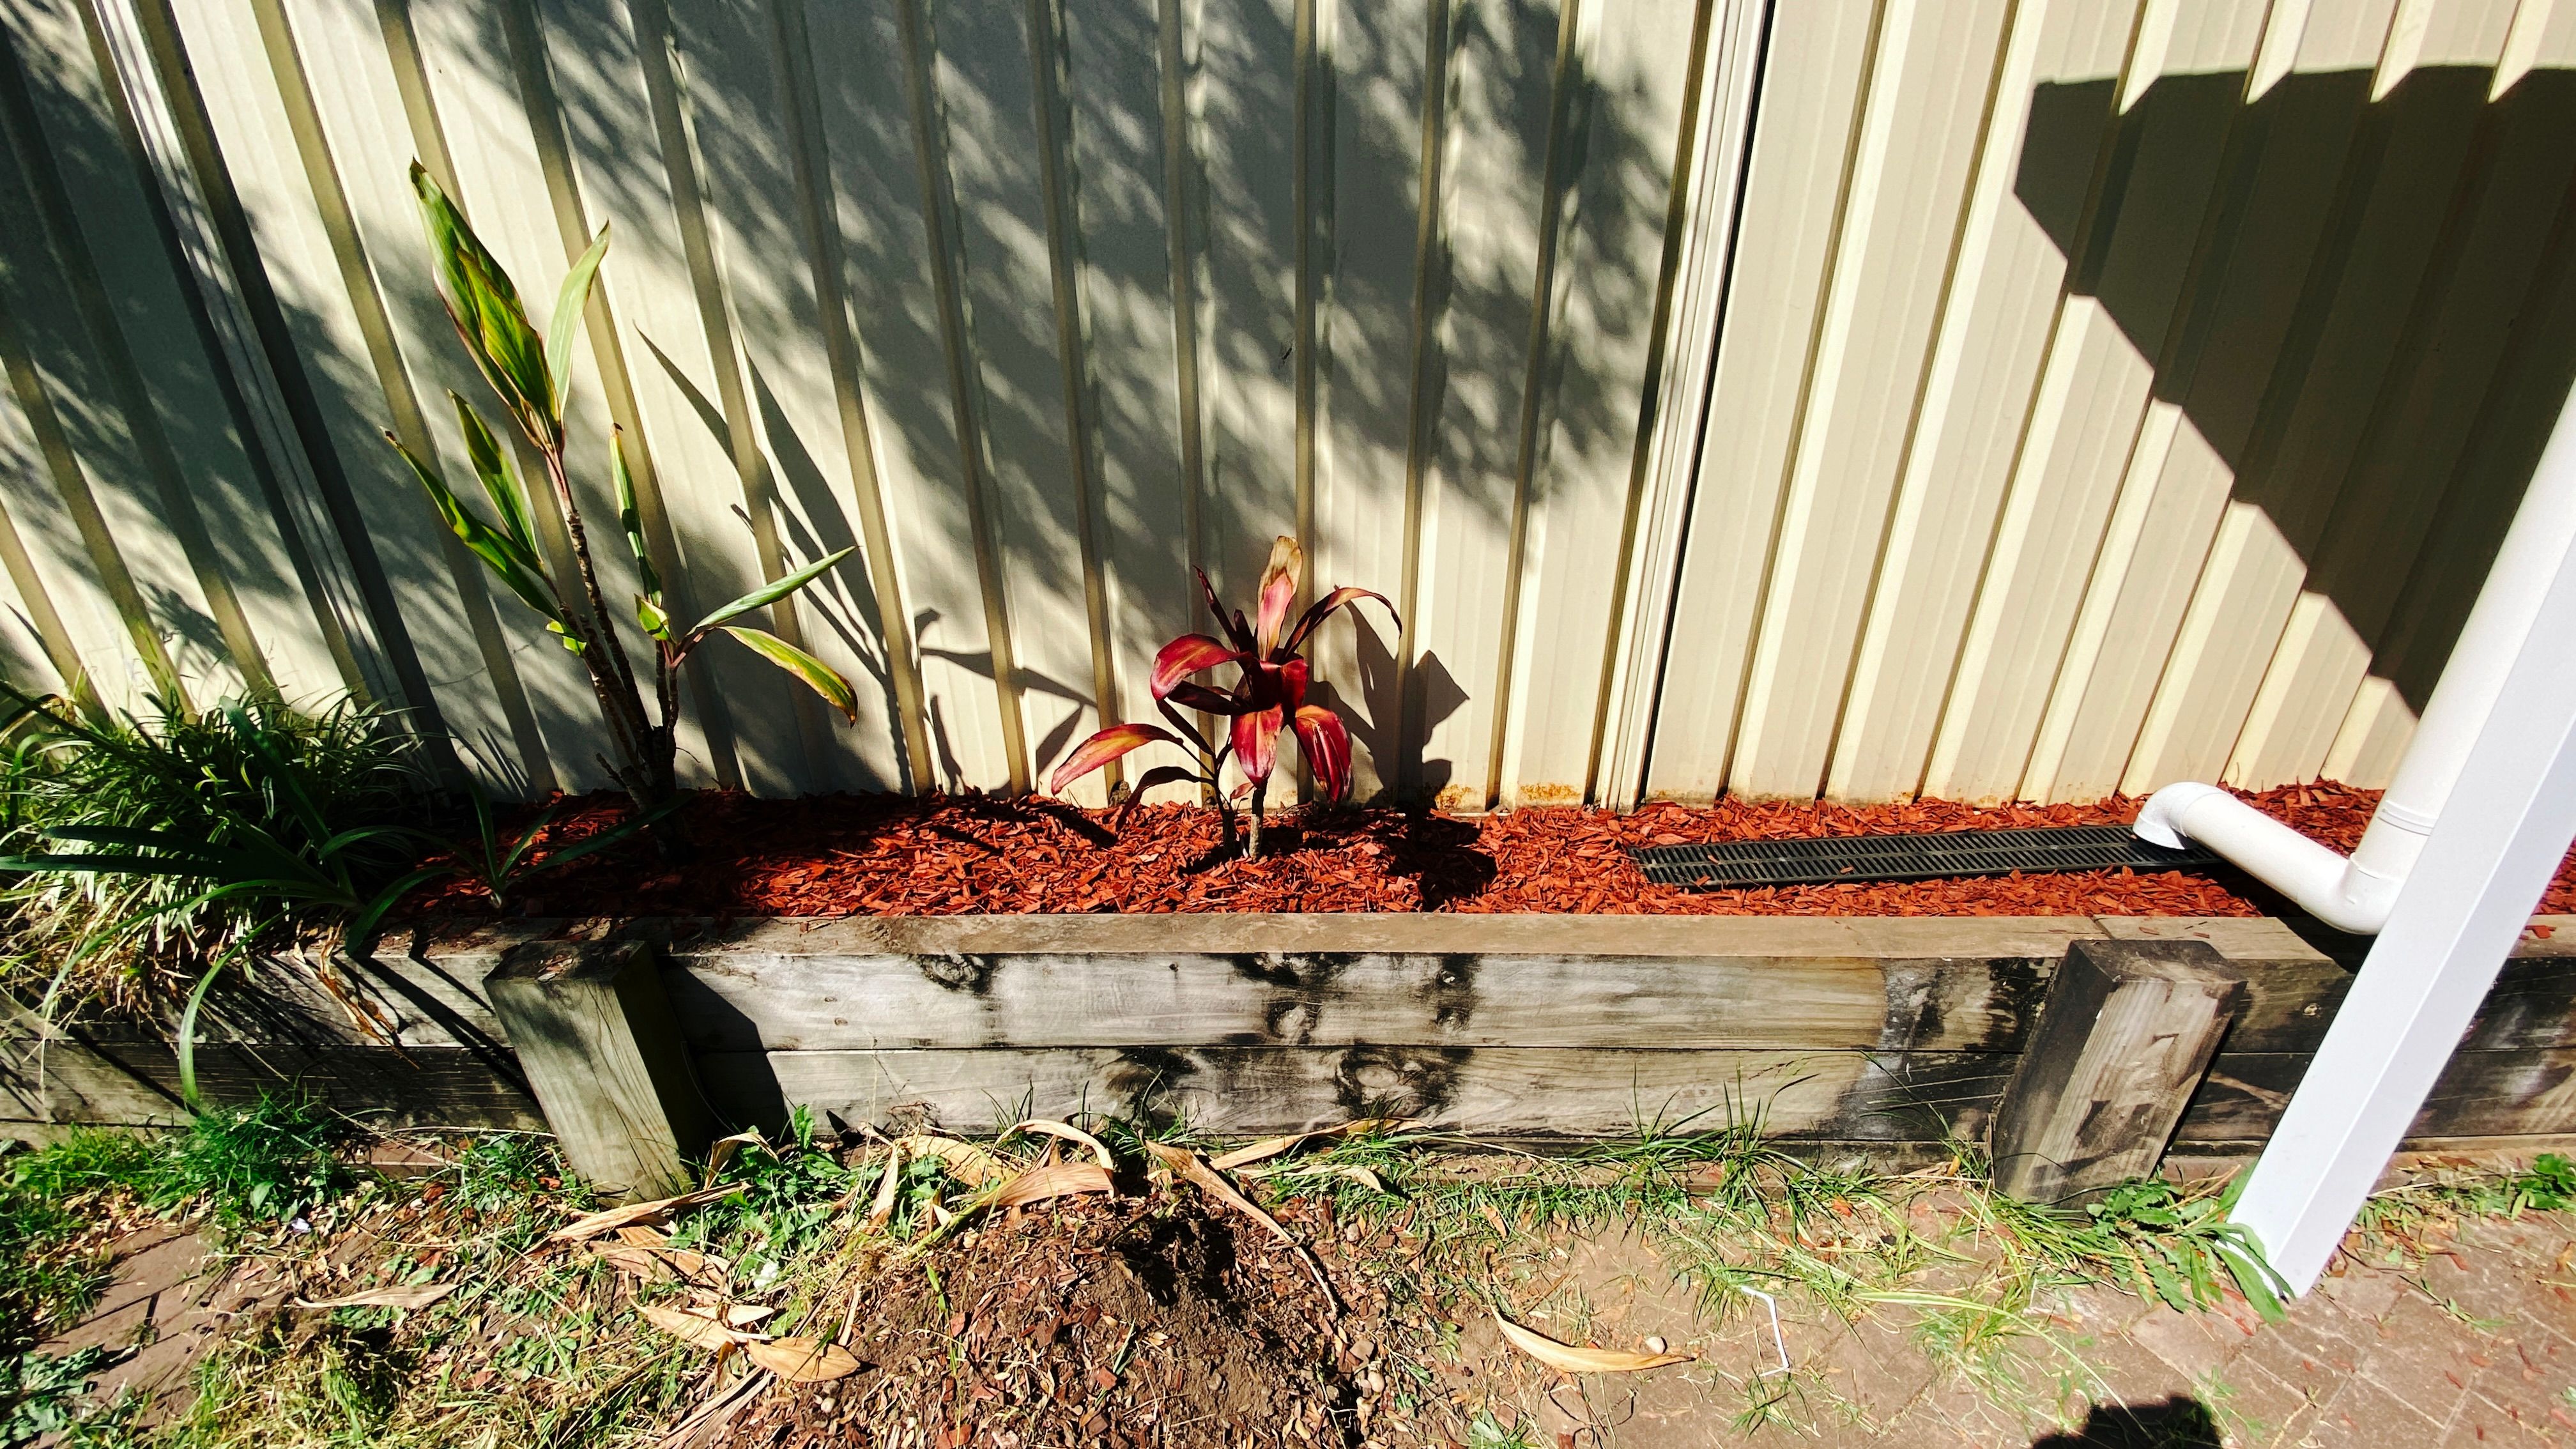 A photo of a narrow raised garden bed alongside a fence. The garden bed is covered in fresh red mulch and there's a metre-long black grate in it that the drainpipe that comes down from the pergola drains into.